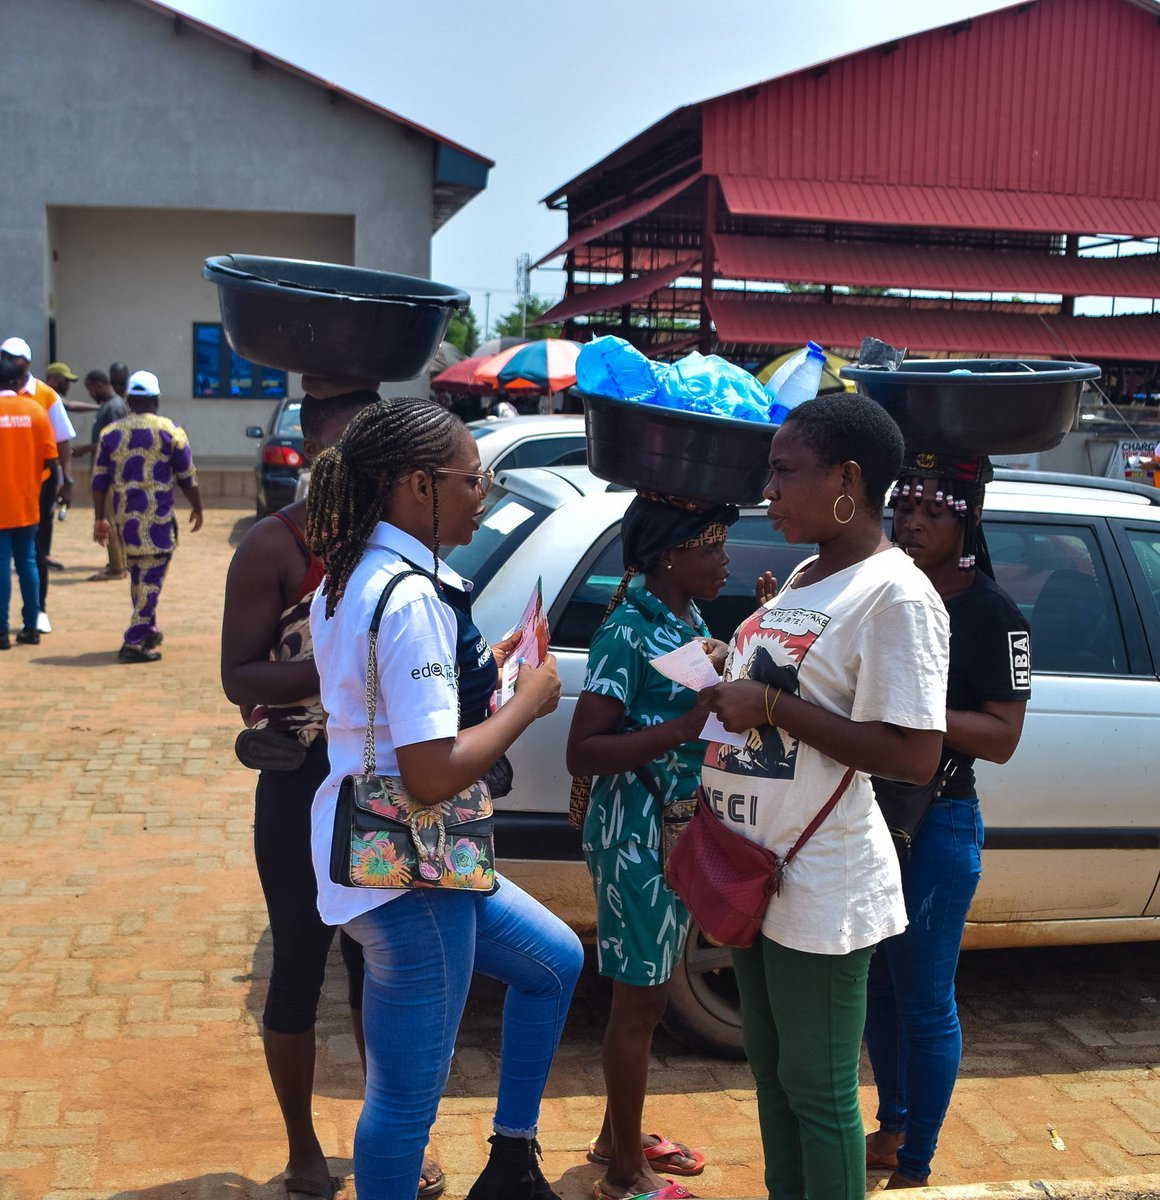 Taking a step further to ensure no small business owner is left behind, we had a sensitization campaign across major markets and streets in Edo state spreading awareness about the Edo State MSME Fund Phase 3 - - When local businesses prosper,the communities prosper.